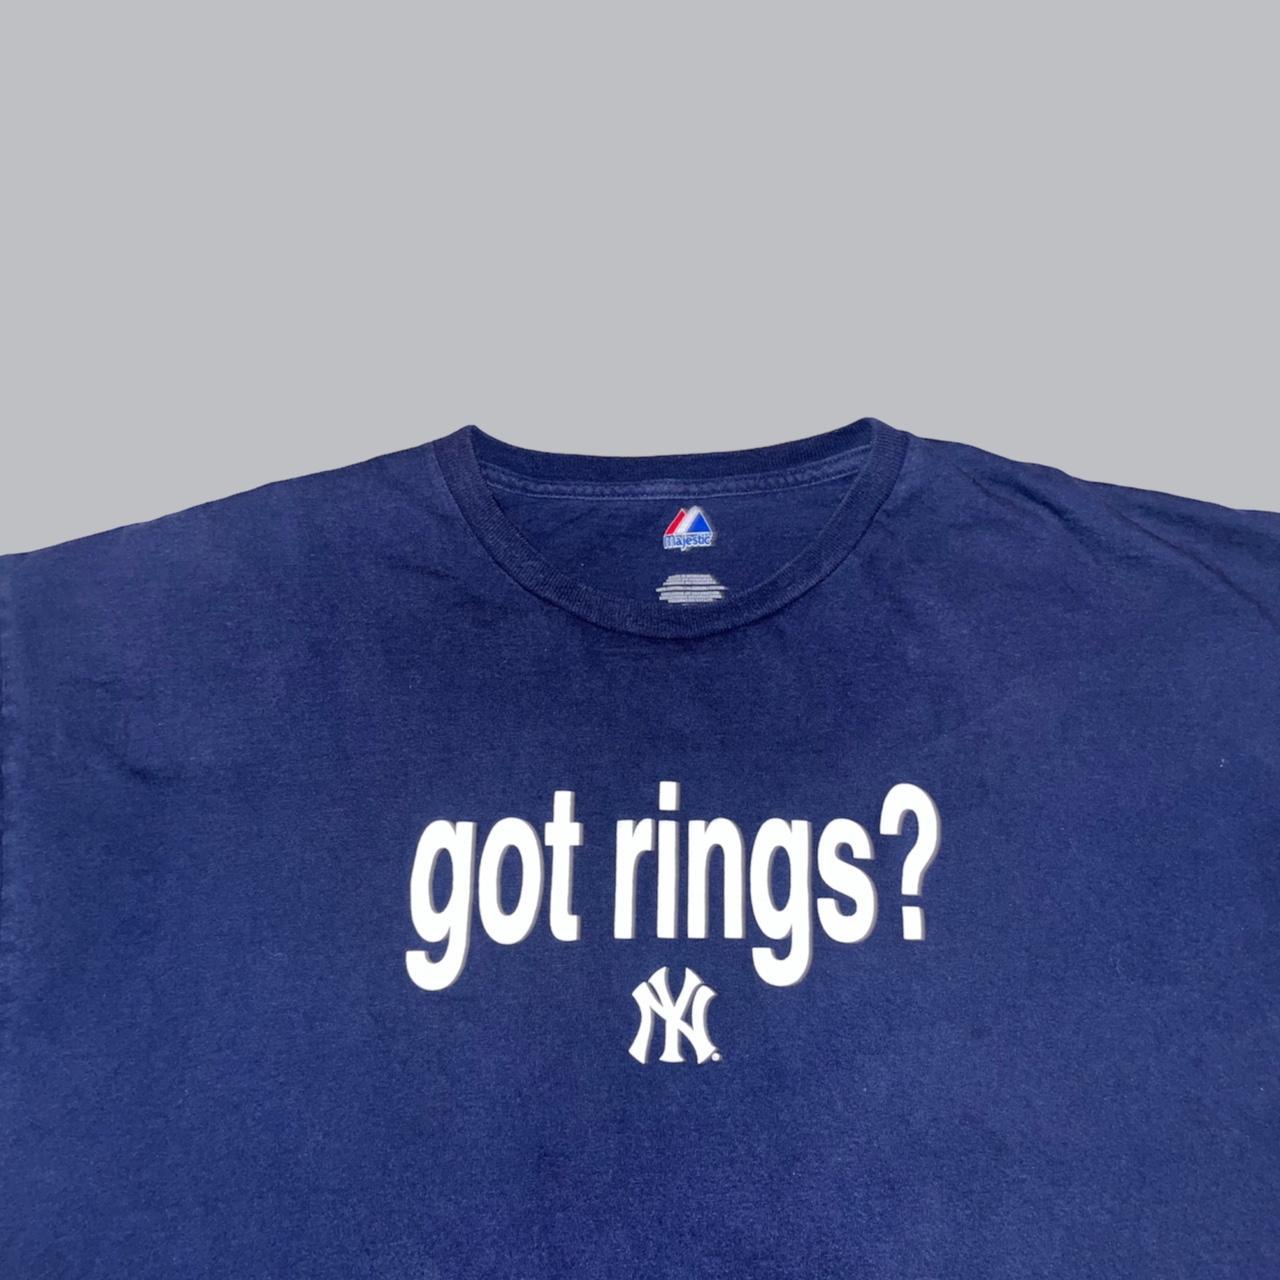 New York Yankees got rings T-shirt - clothing & accessories - by owner -  apparel sale - craigslist